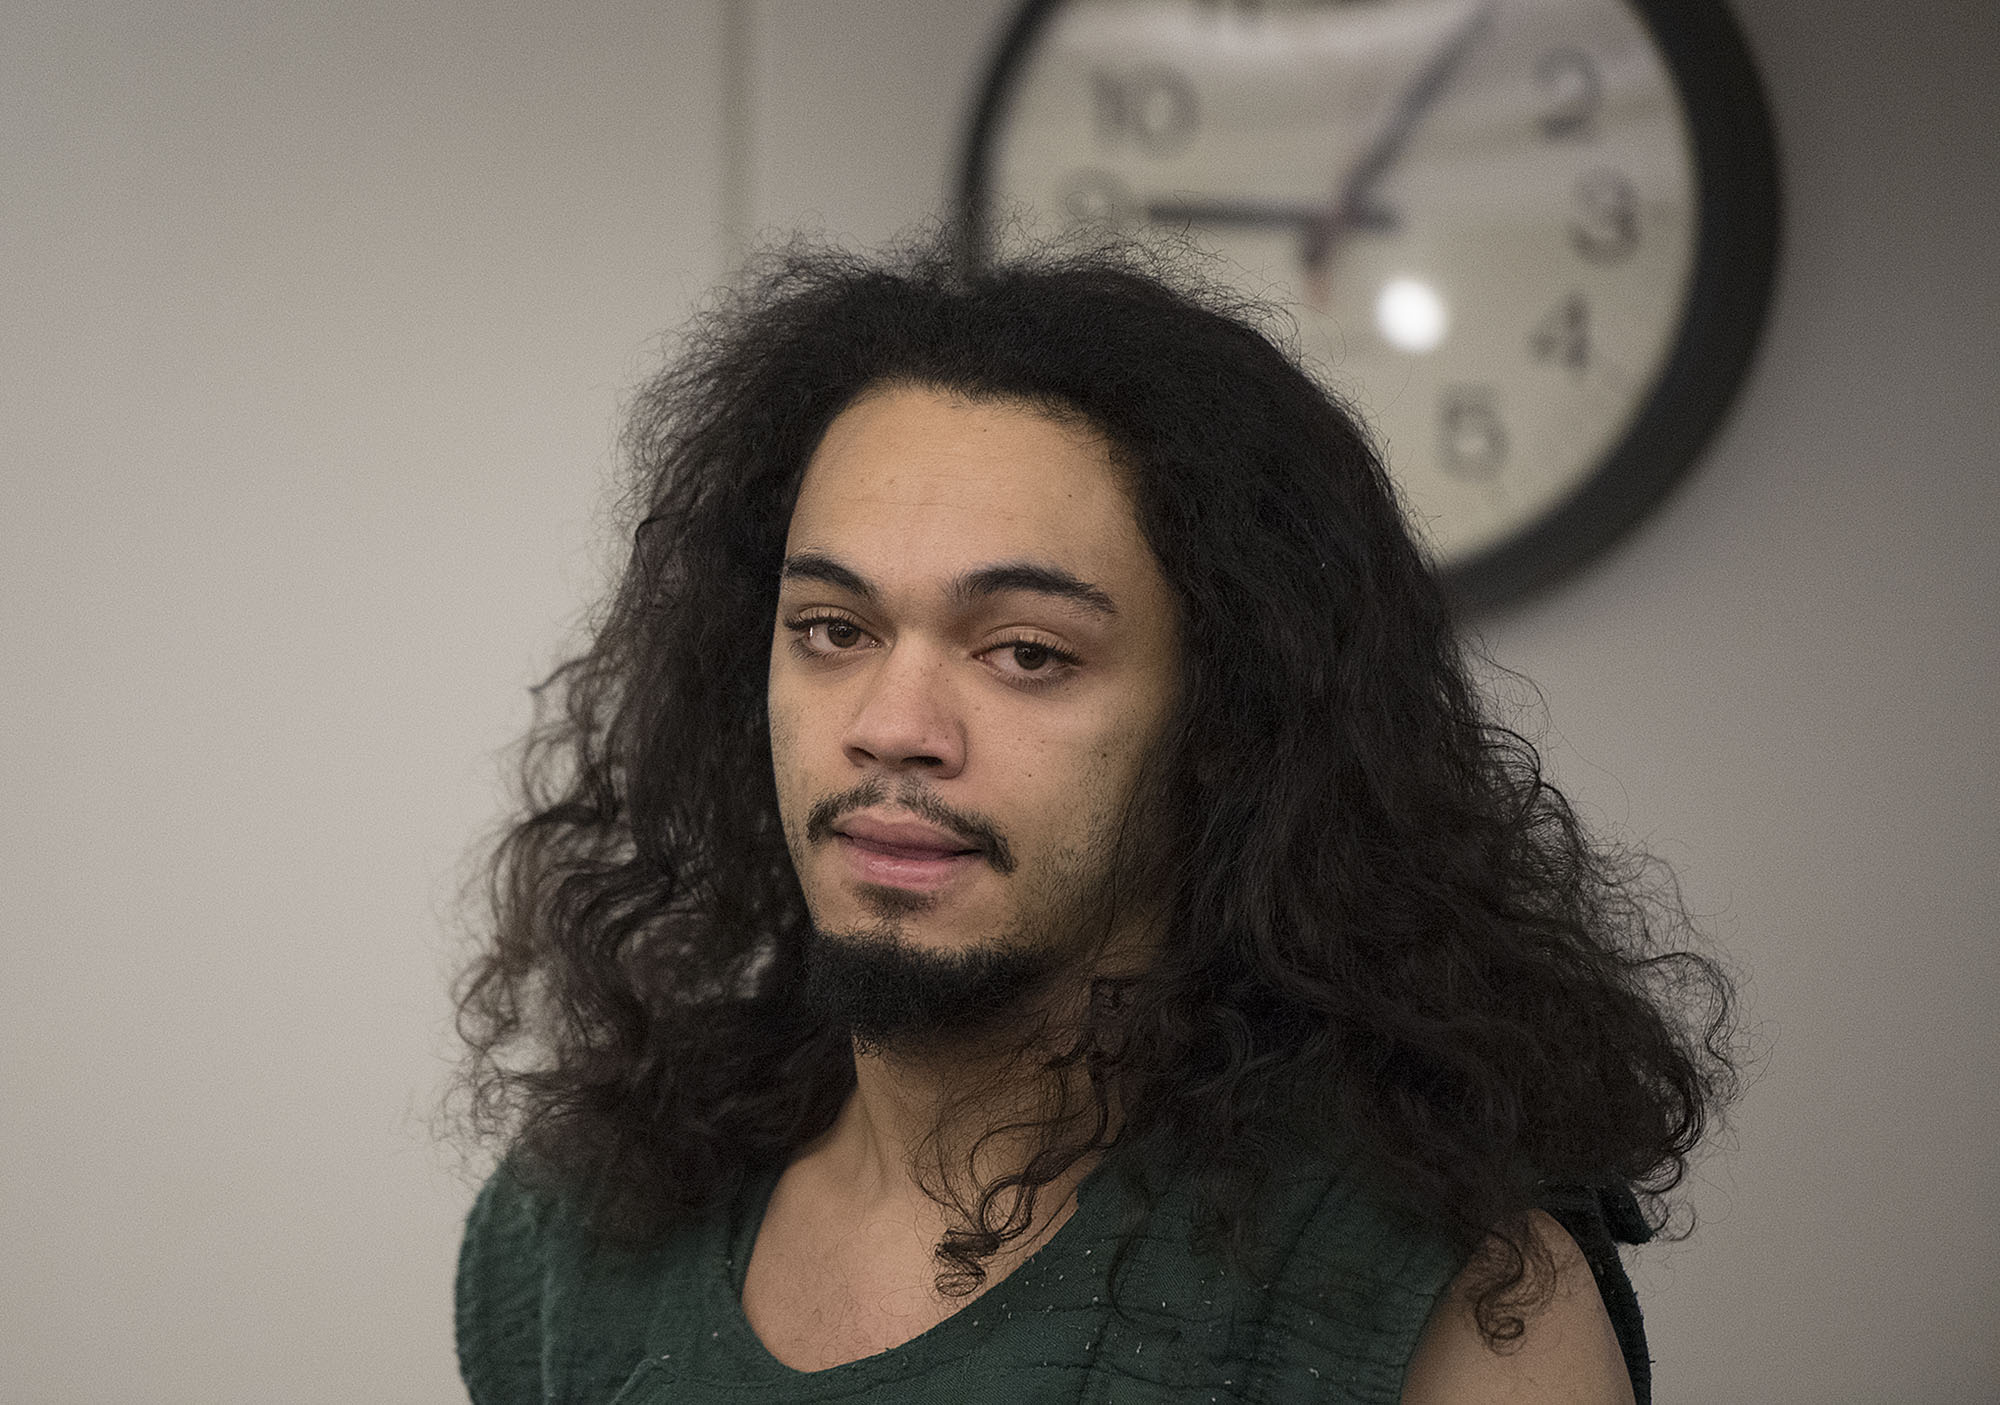 Isaac Depre Frazier makes a first appearance Tuesday, Jan. 2, 2018, in Clark County Superior Court in connection with two recent shootings in Vancouver.